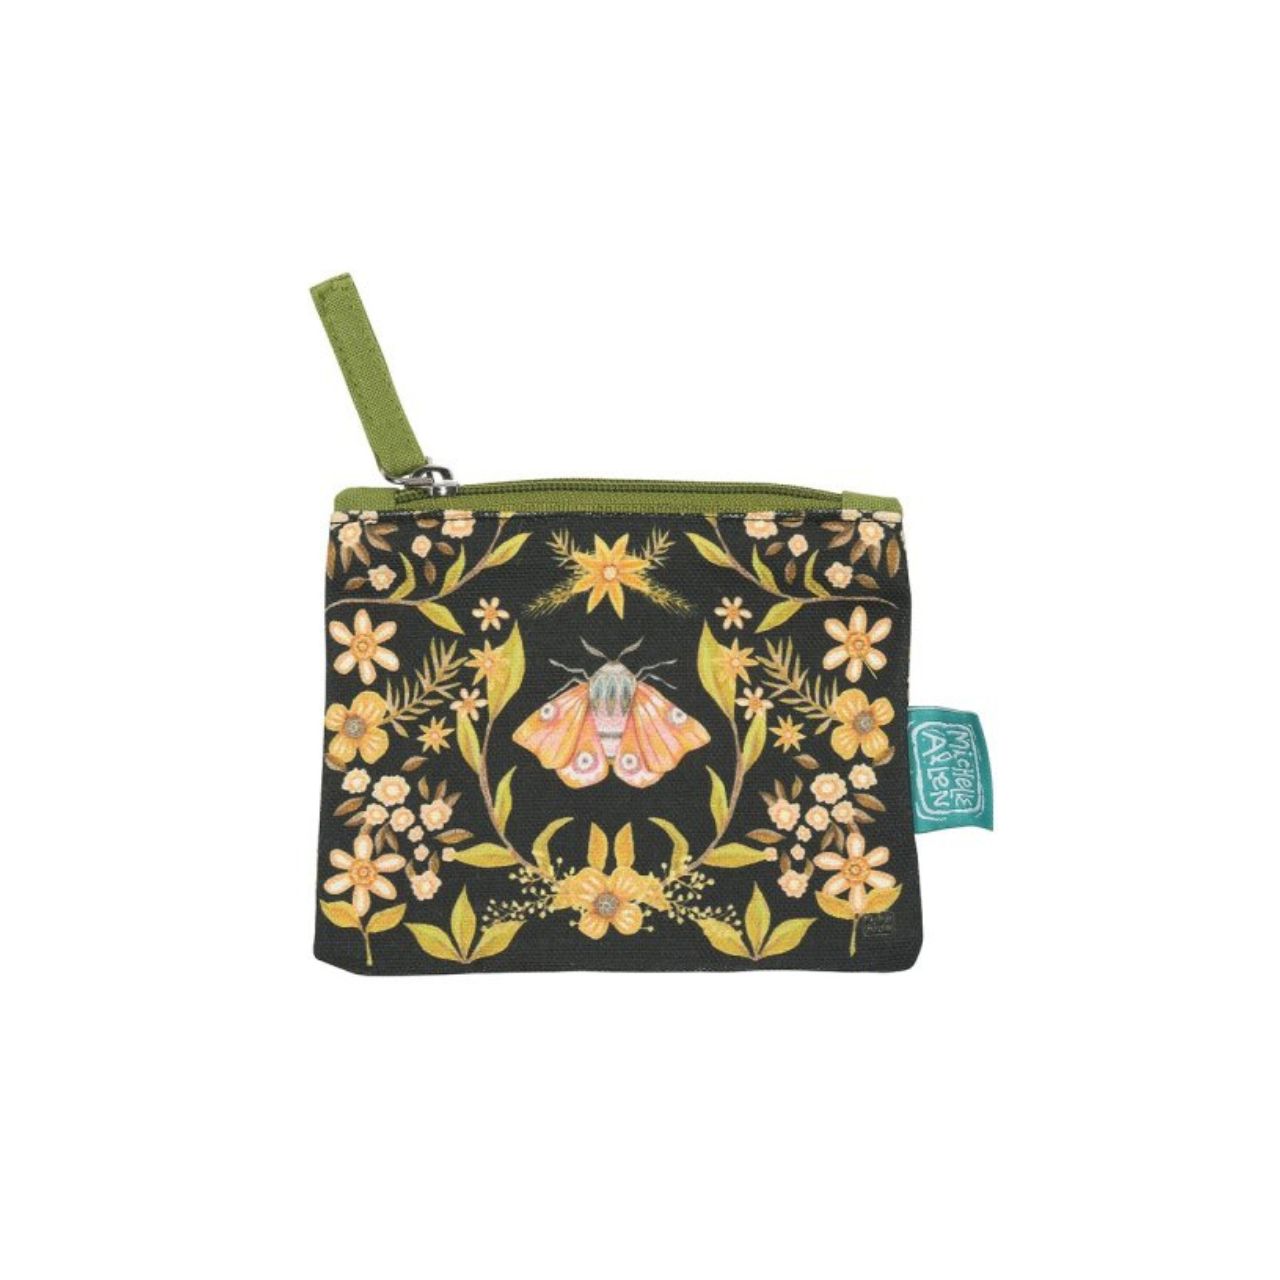 Michelle Allen Black Moth Zipped Pouch Small  These beautiful zippered 100% Cotton pouches are perfect for pencils/pens, trinkets, charging cords, make up or pretty much anything you can possibly think of. Exclusively designed by Michelle Allen.